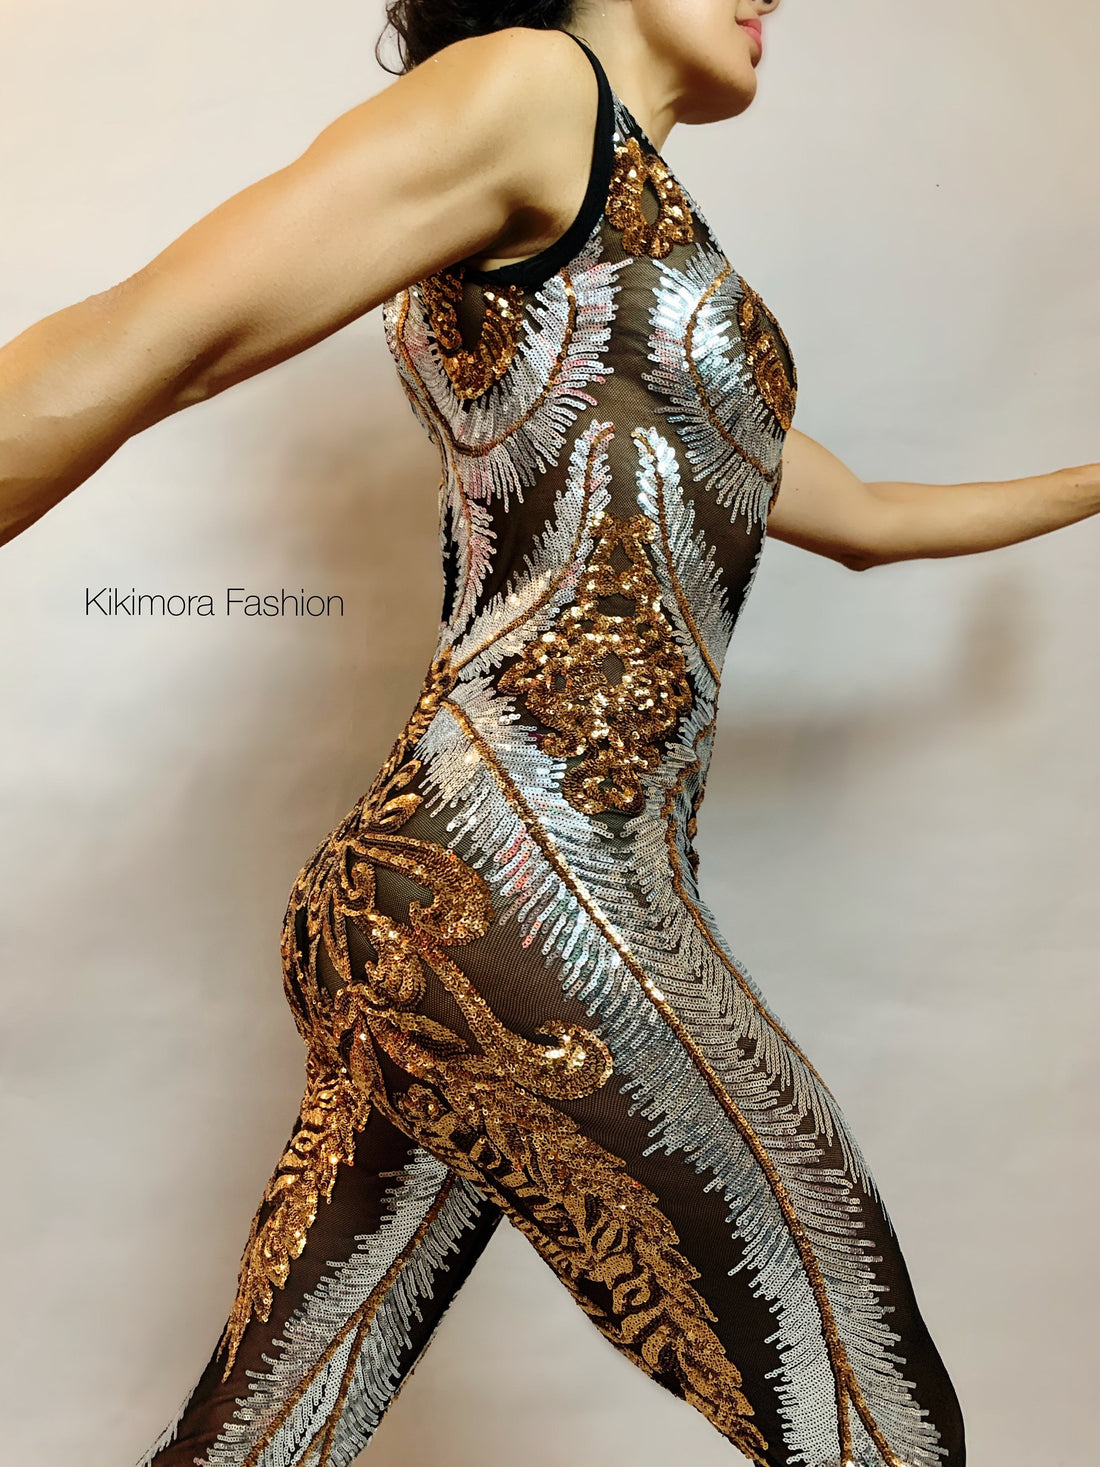 Showgirl Costume, Sequin Bodysuit for Women or Men, Shiny, Beautiful Contortionist Costume, Personalized Dressing Gown